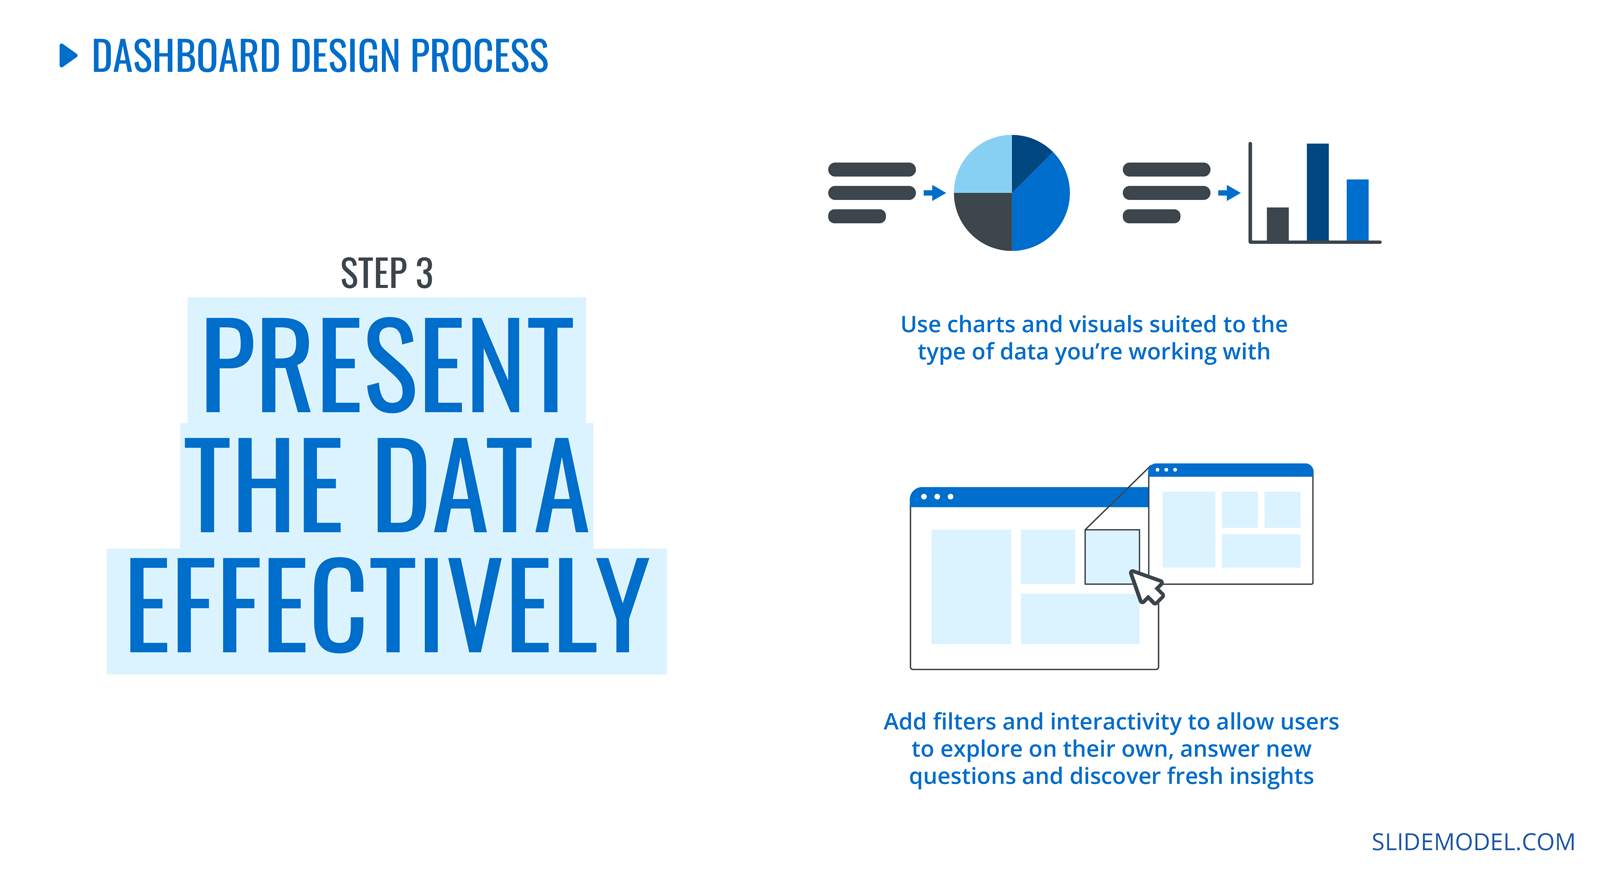 Dashboard Design Process. Step 3: Present the Data Effectively